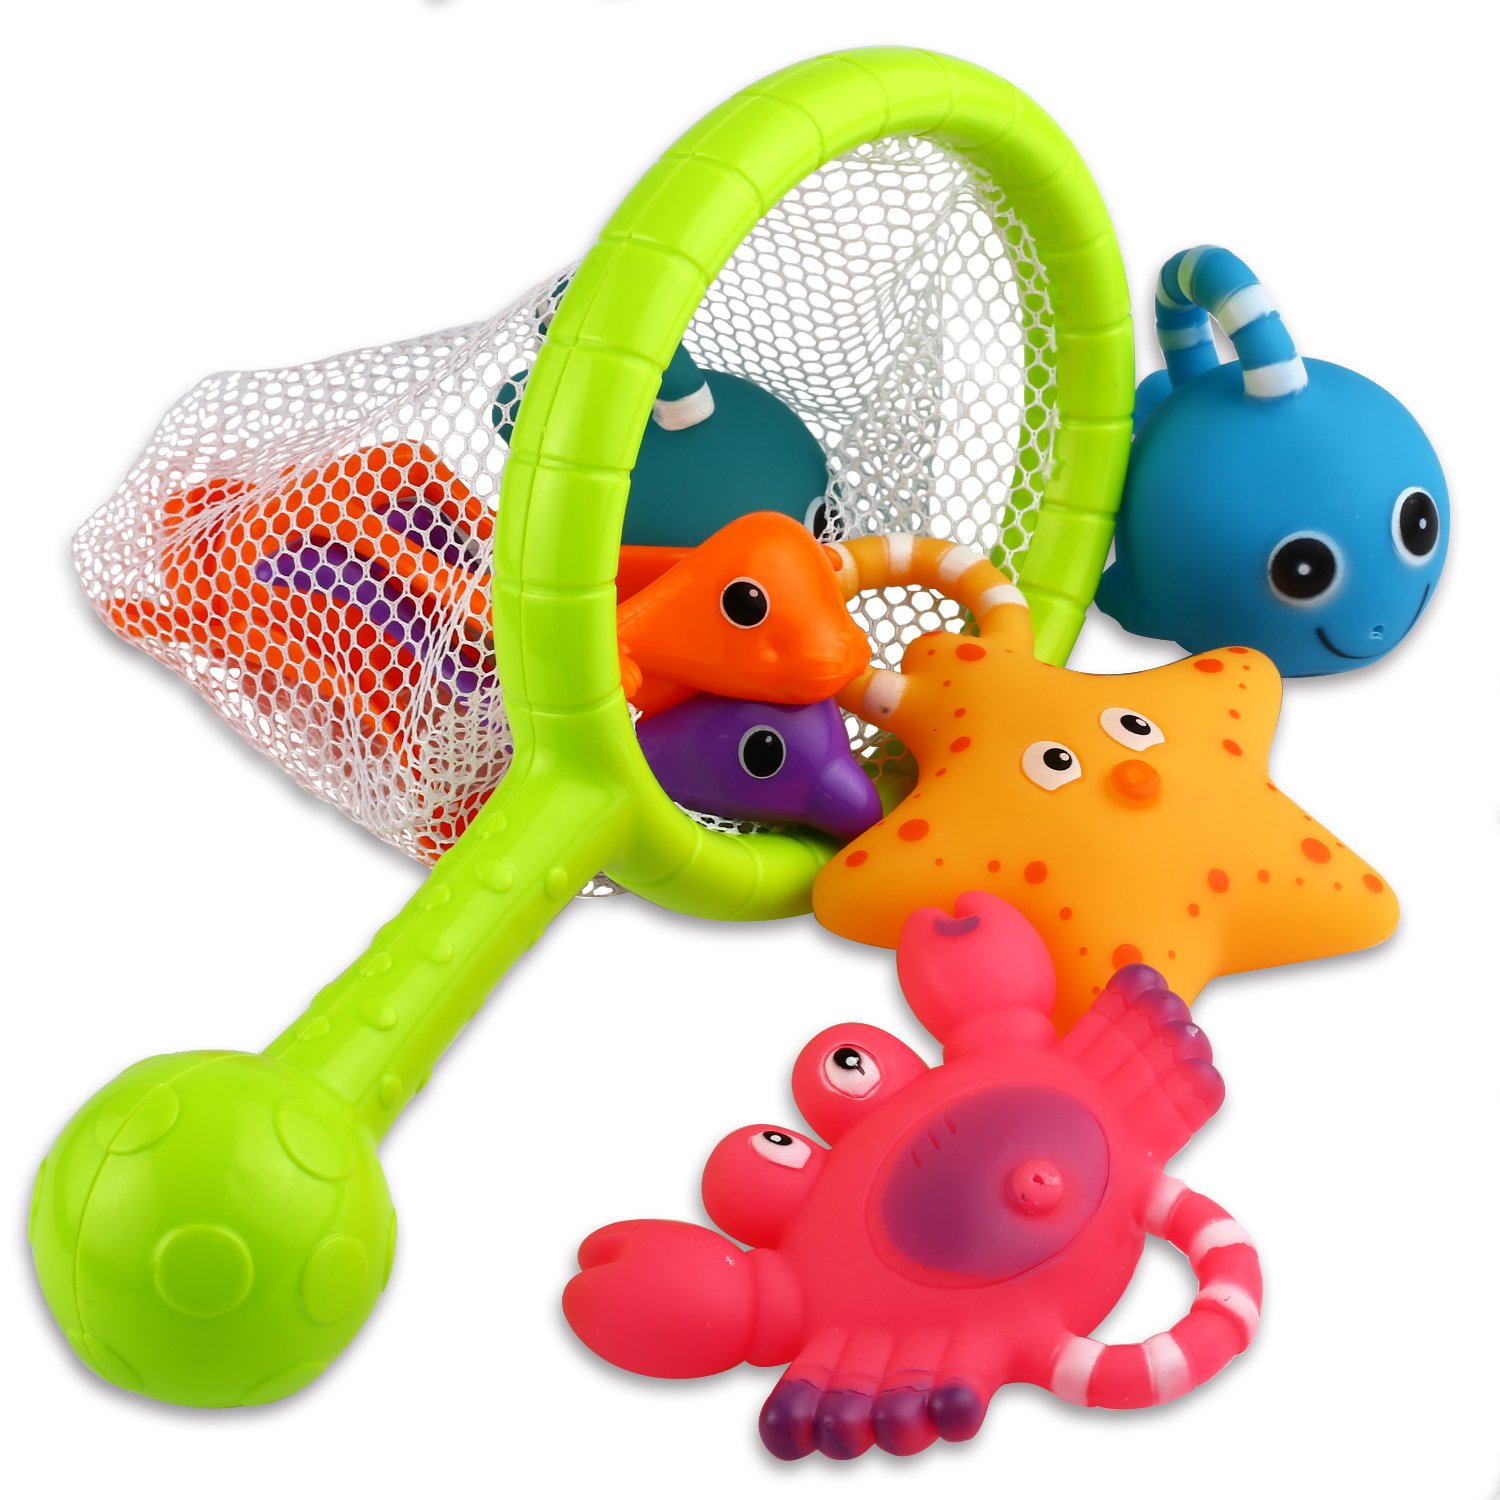 KarberDark Bath Toy, Fishing Floating Squirts Toy and Water Scoop with Organizer Bag(8 Pack), Fish Net Game in Bathtub Bathroom Pool Bath Time for Kids Toddler Baby Boys Girls, Bath Tub Spoon